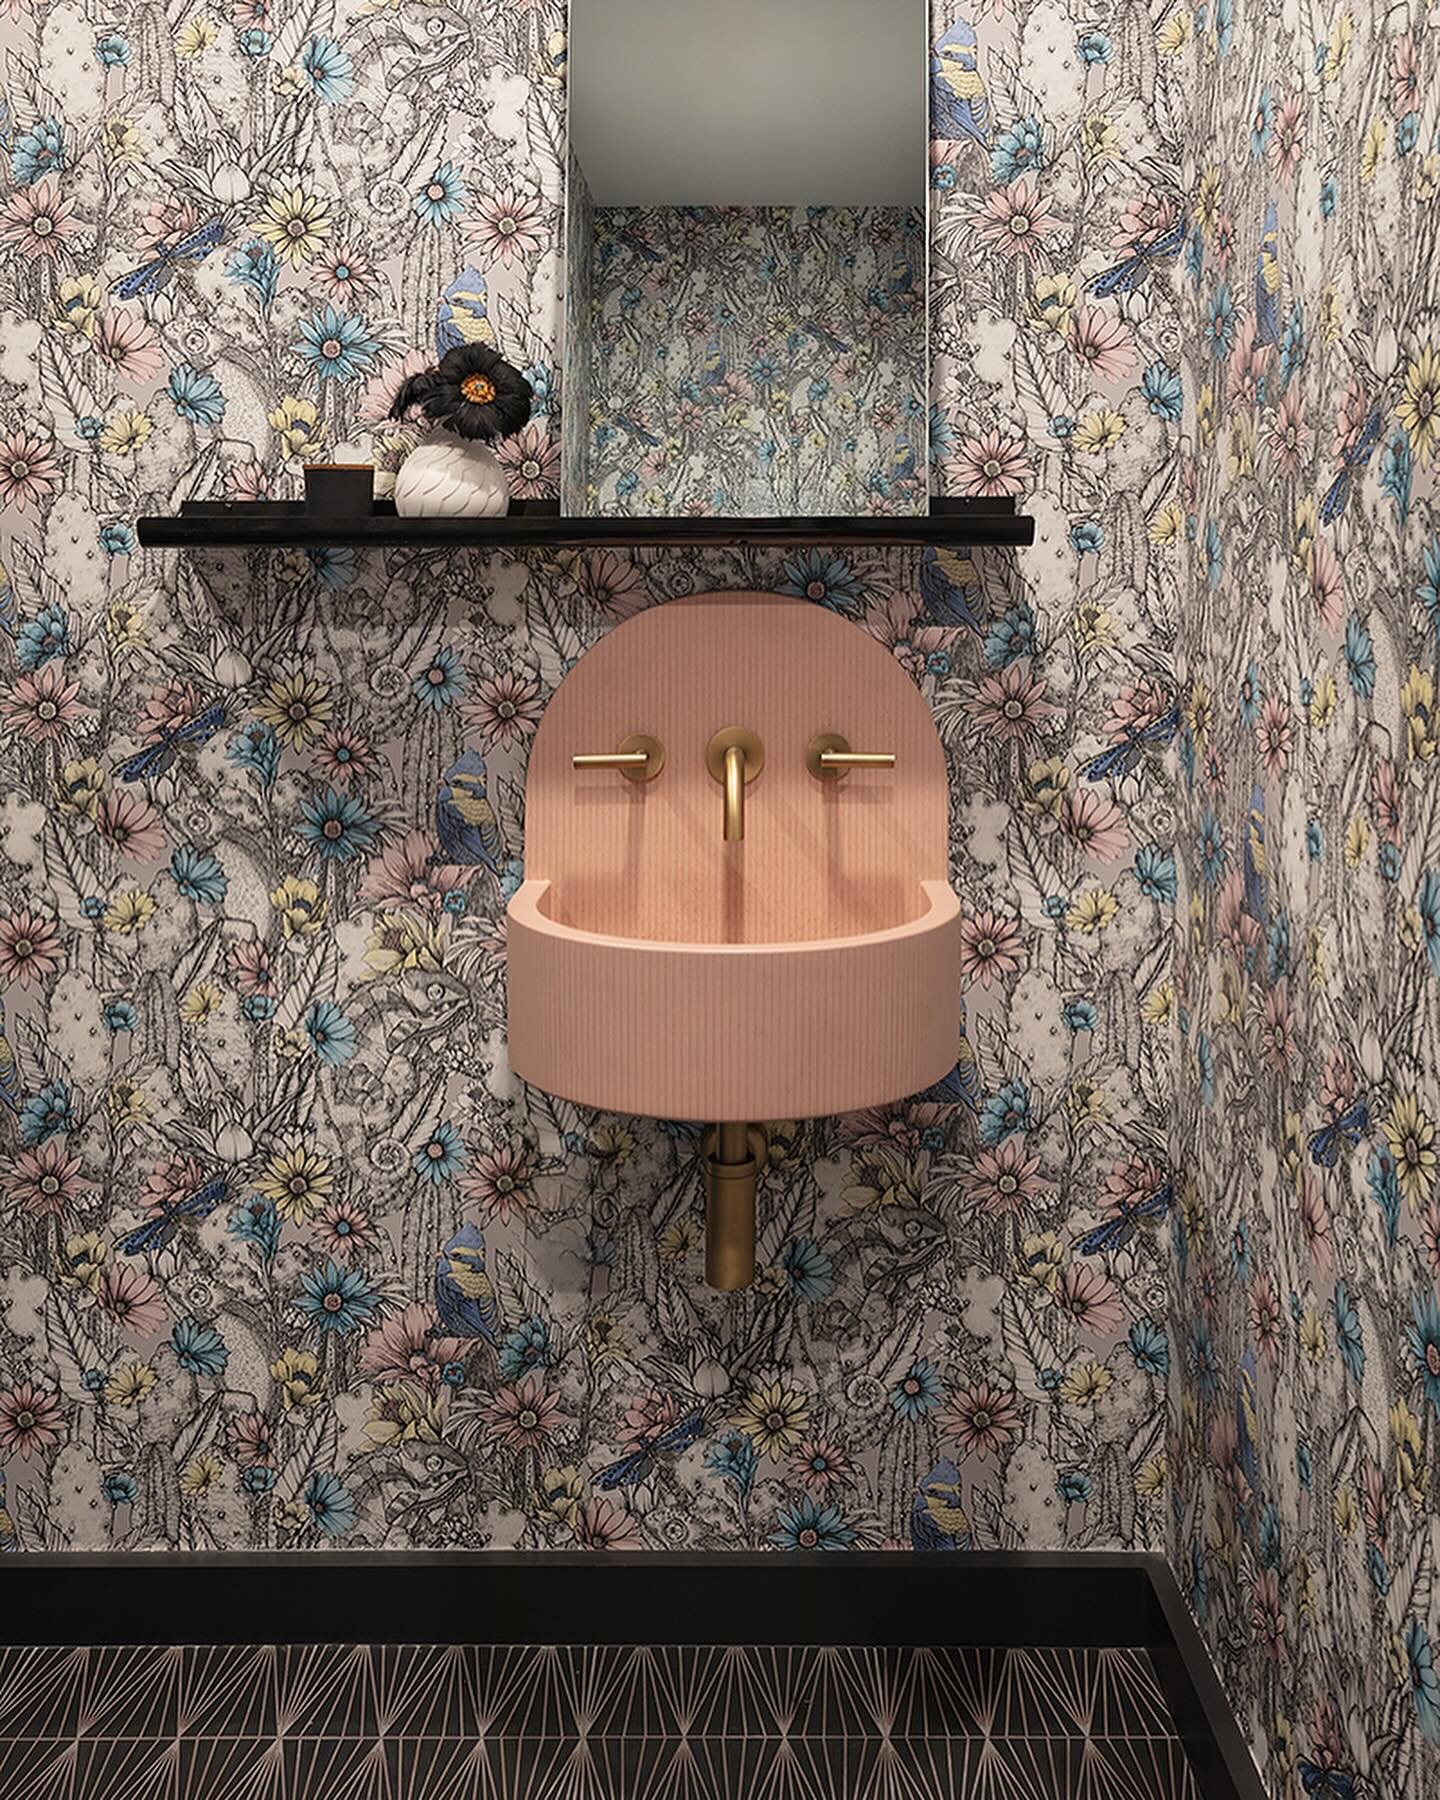 From plain to picturesque, this powder room underwent a major upgrade: Think heated floors, a high-tech toilet, captivating wallpaper, and this chic ceramic sink! Dreams really do come true for our delighted homeowner.

Have you experienced the Perez